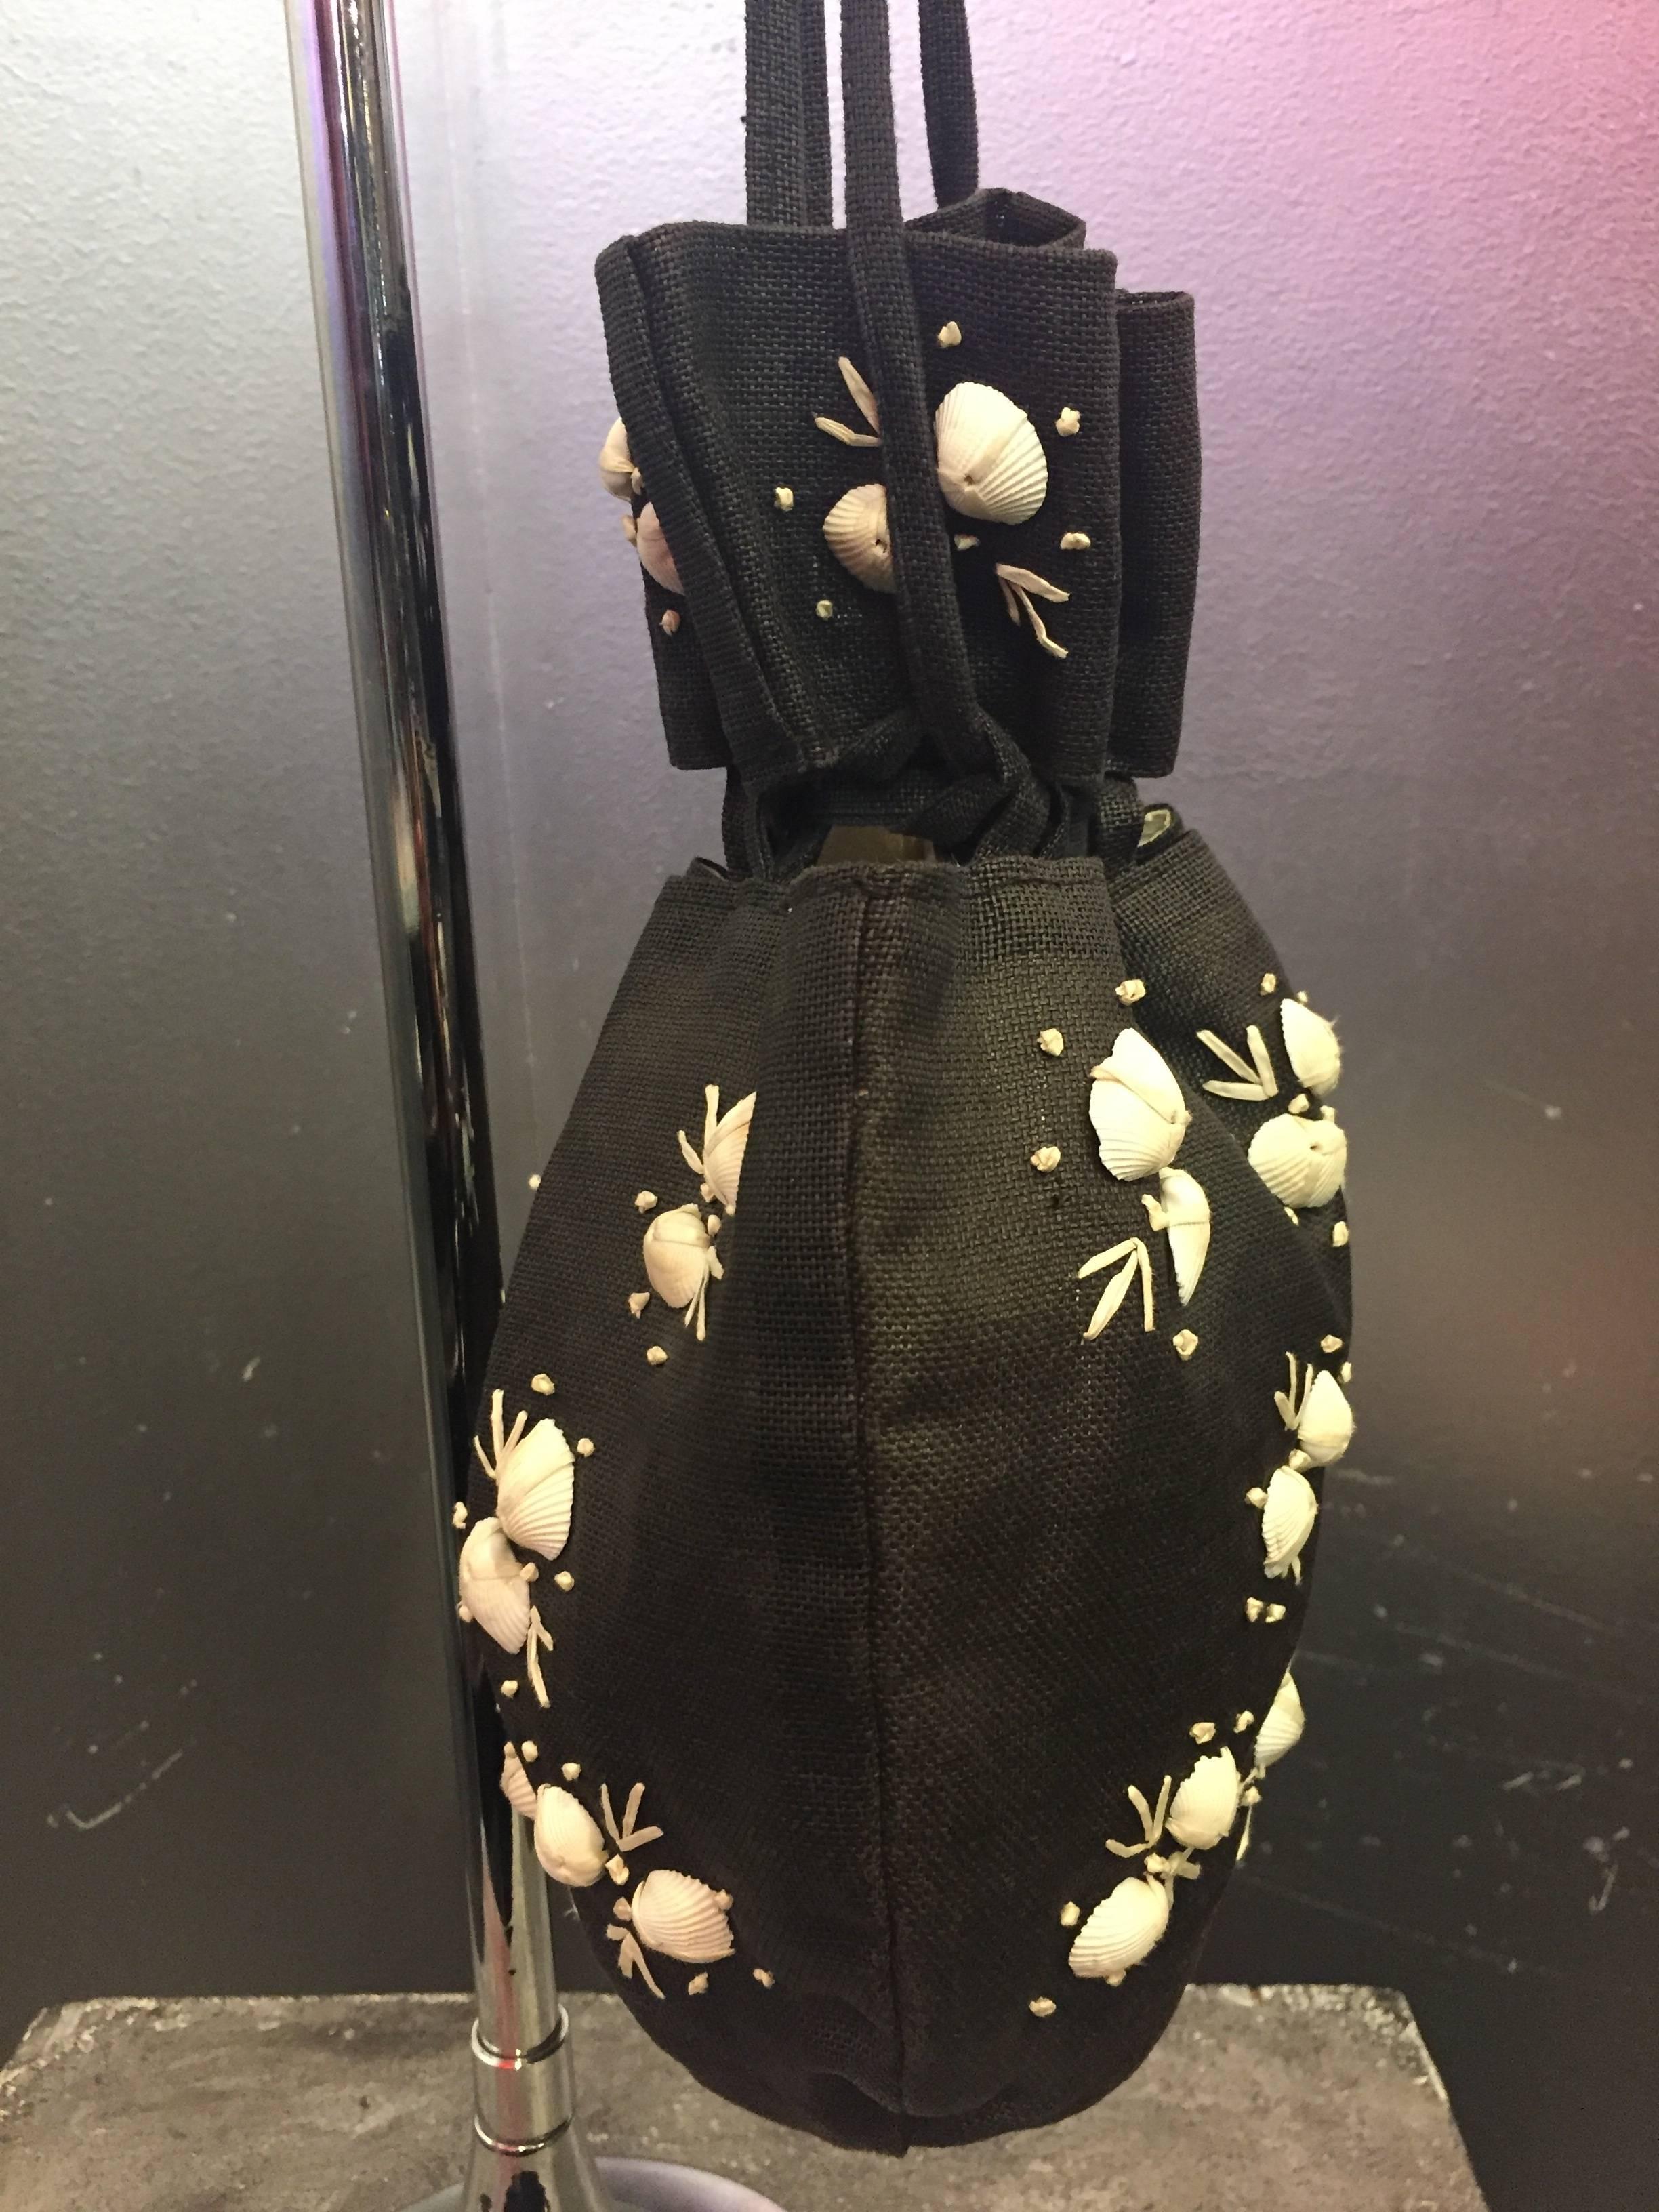 A wonderful drawstring style black straw pouch bag made of finely woven black straw. The exterior is adorned with real seashells and embroidery. Perfect for summer and resort attire. 